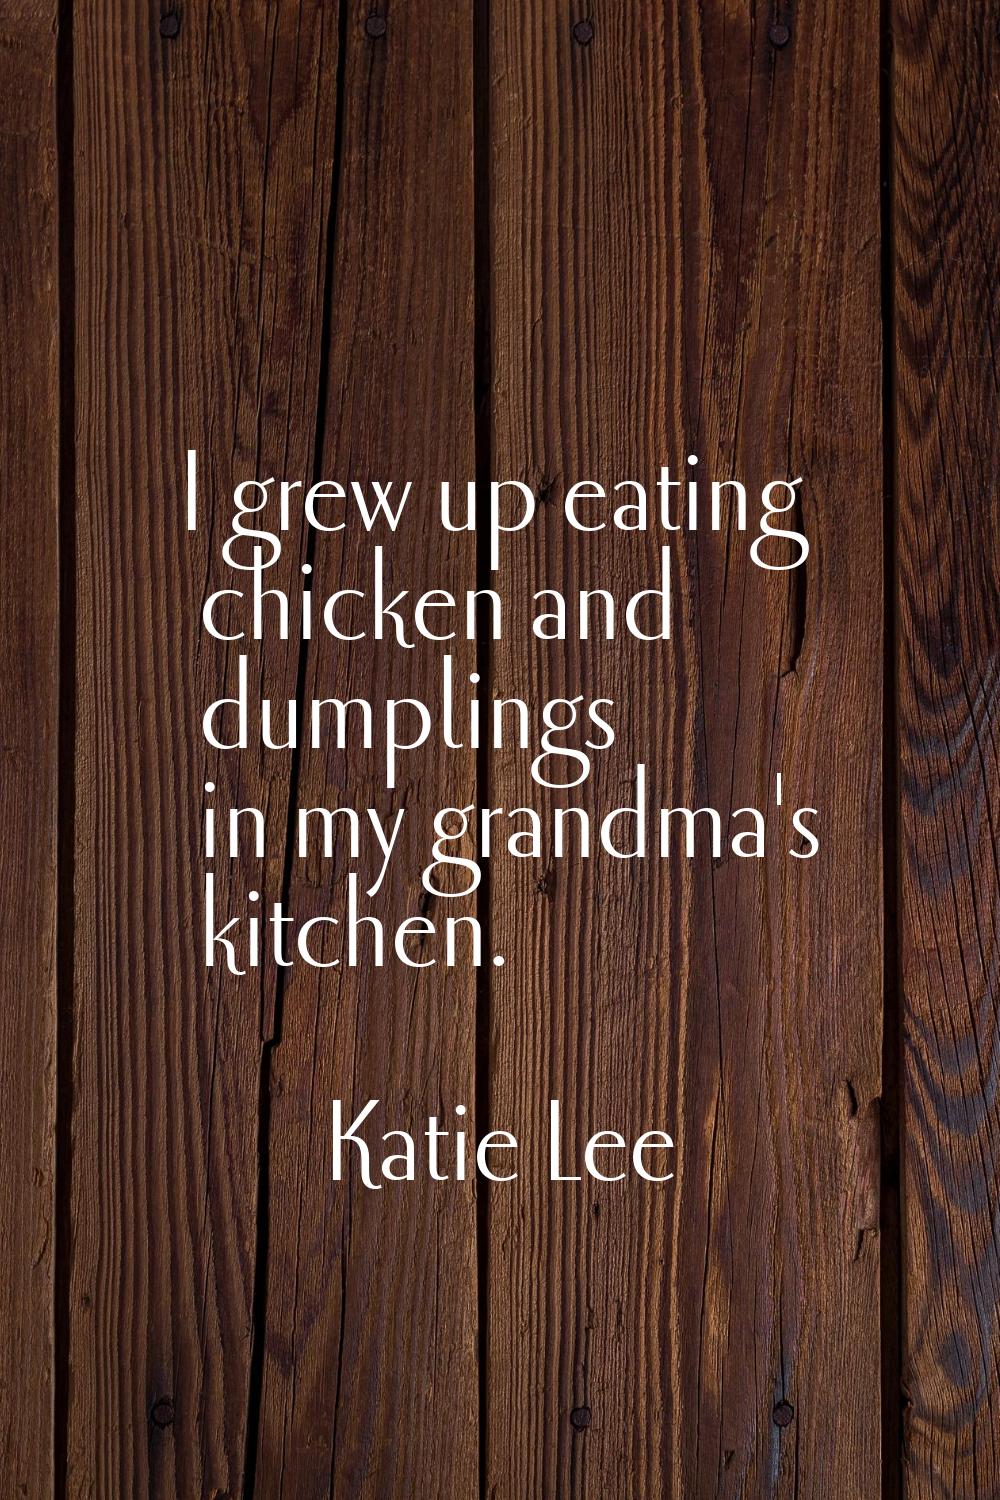 I grew up eating chicken and dumplings in my grandma's kitchen.